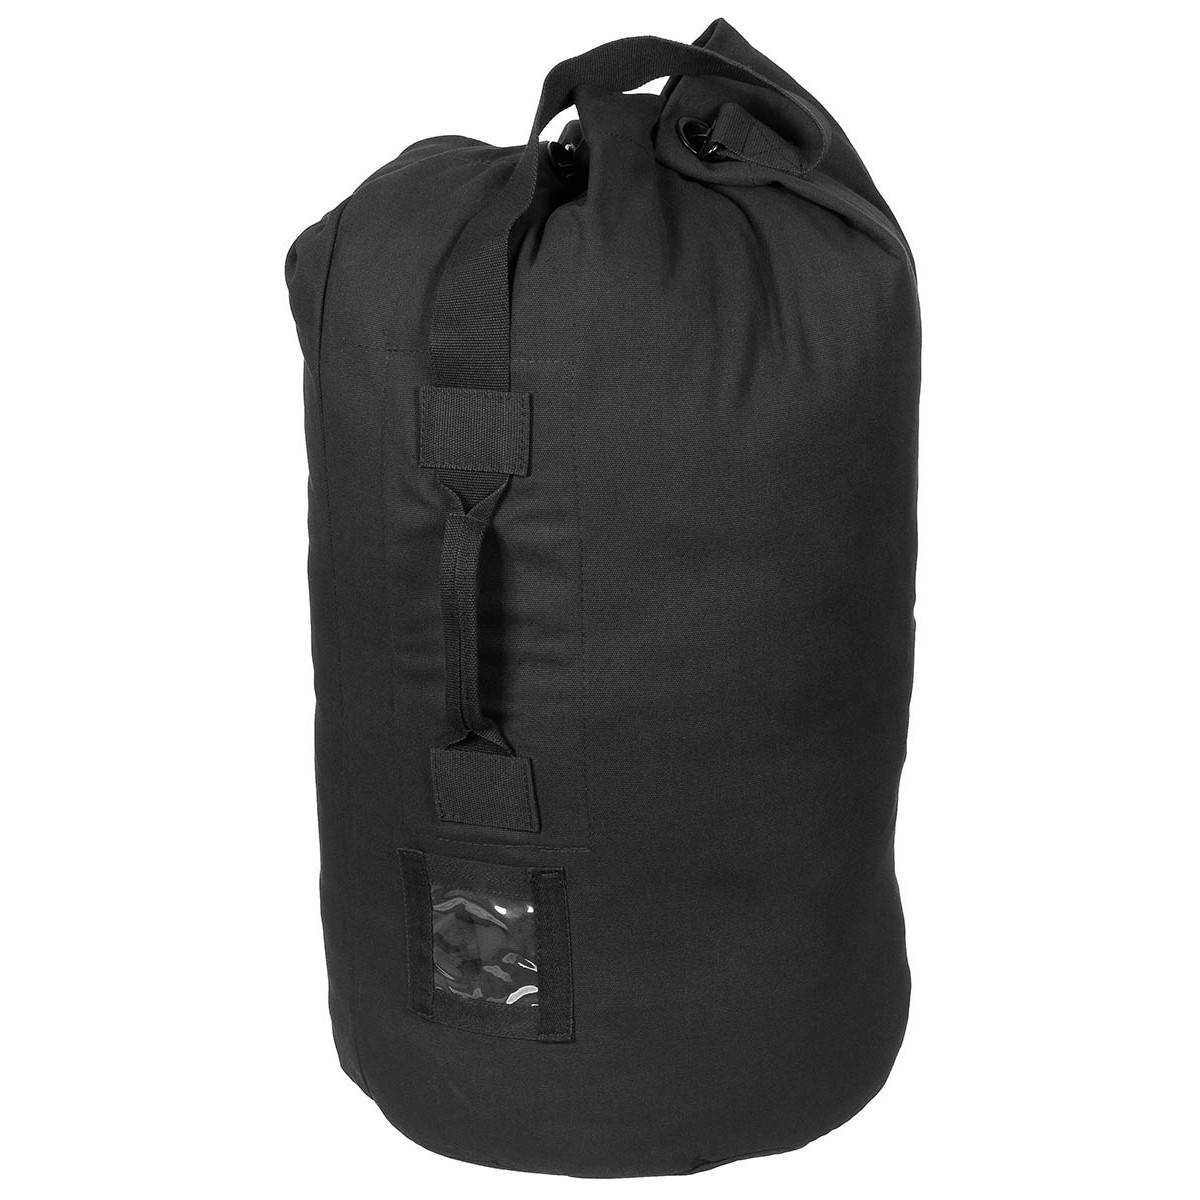 US Duffel Bag, black, with carrying strap | Trekking \ Accessories ...